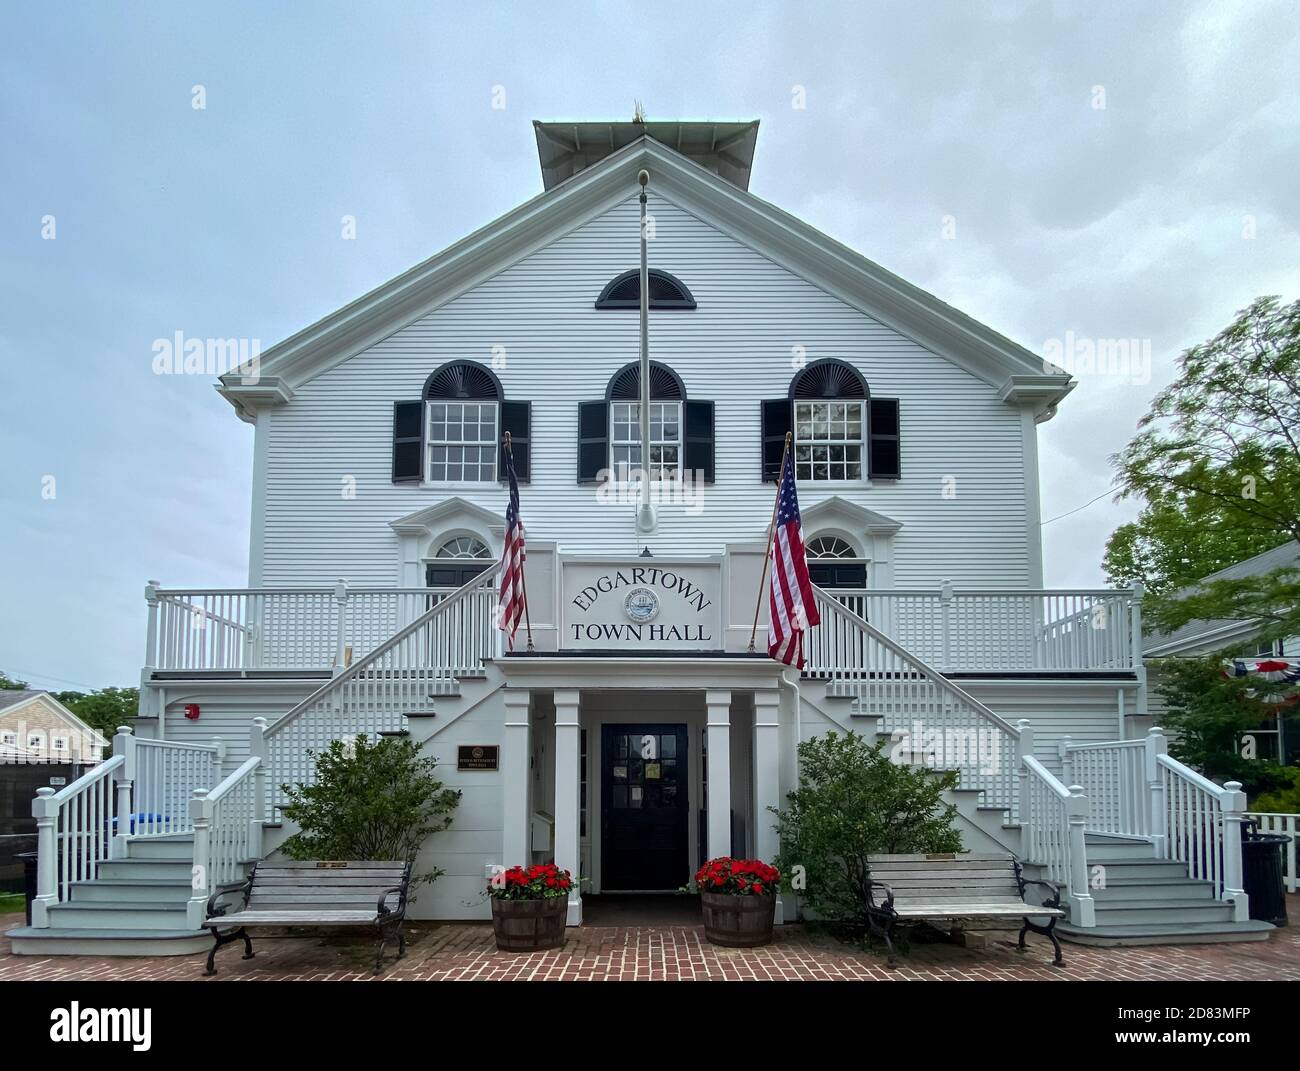 Edgartown, MA - July 5, 2020: Edgartown Town Hall, a local governent building in Edgartown, Massachusetts in Martha's Vineyard. Stock Photo